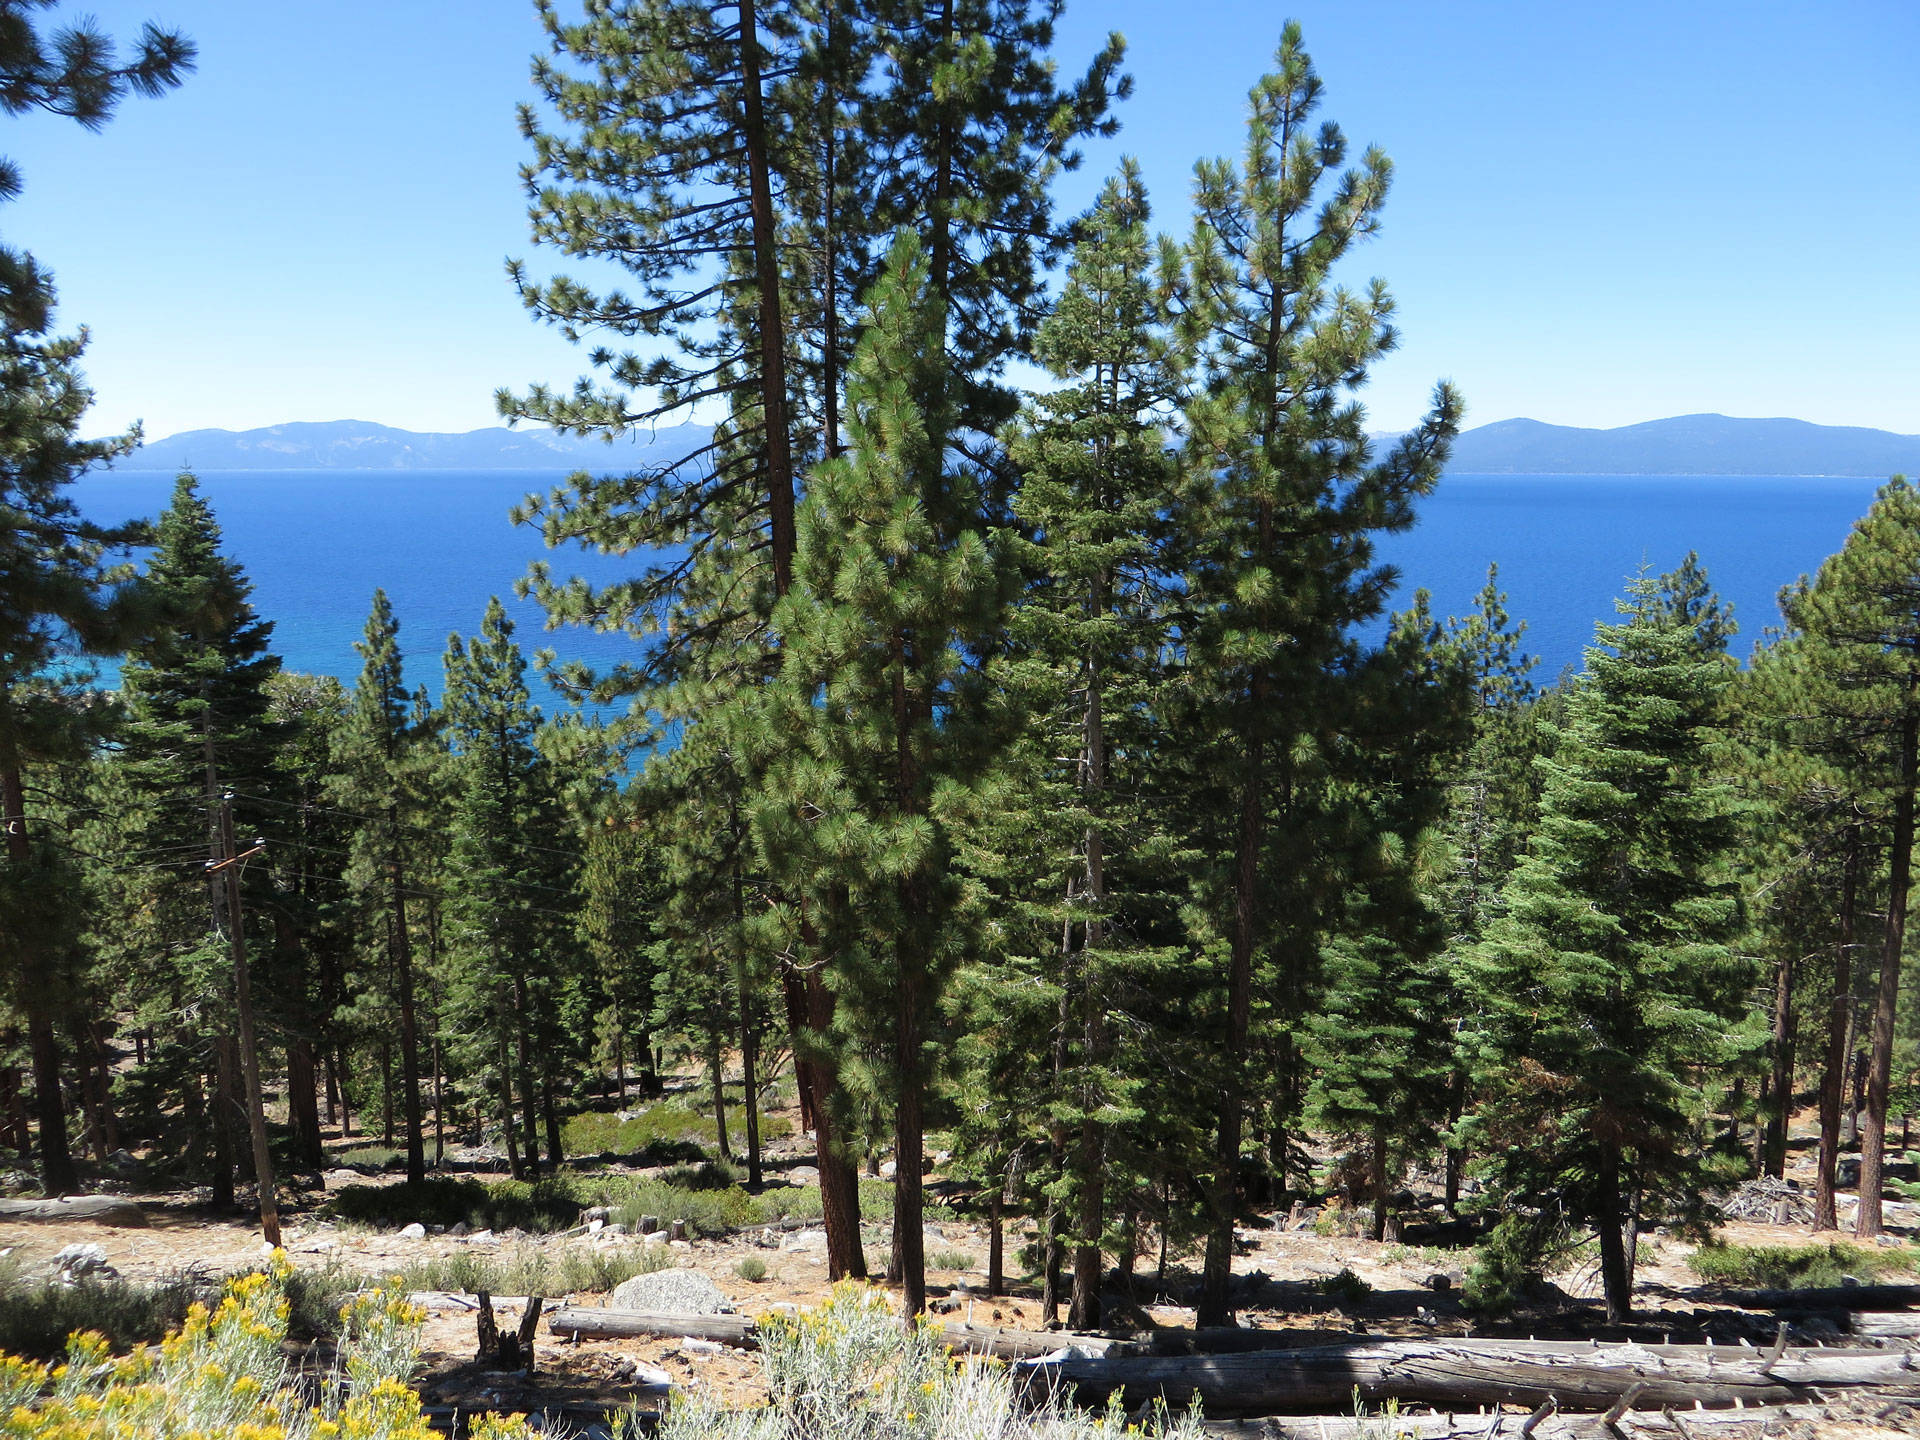 Some cap-and-trade proceeds are going to forest and watershed restoration around Lake Tahoe, which is expected to create multiple benefits: Clearing crowded forests allows more healthy trees to grow, take in and store carbon in the ground and stabilize soils that hold water. Ken Lund/Flickr